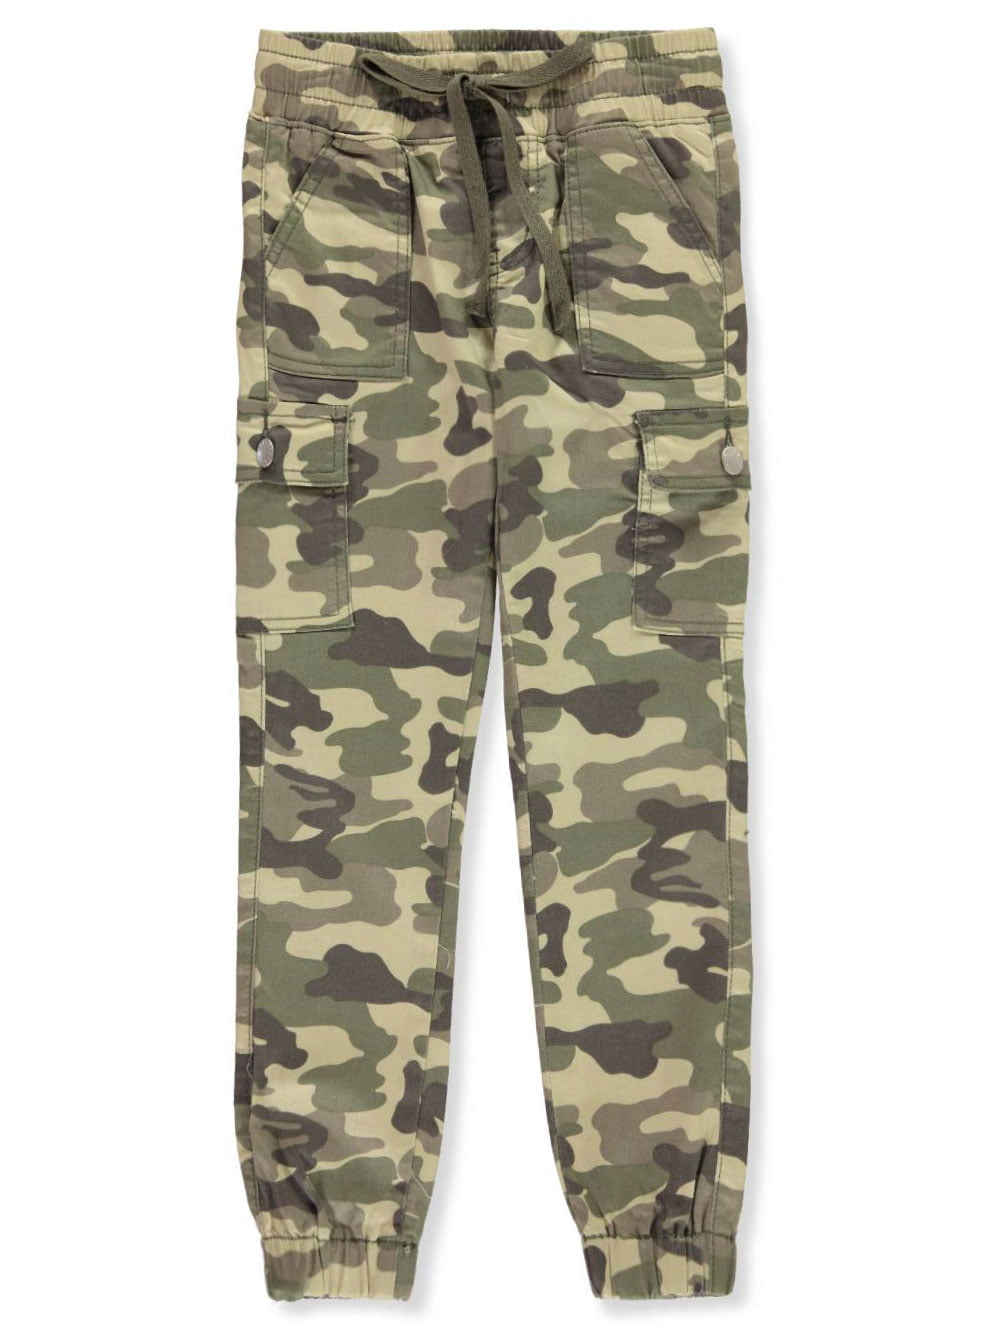 VIP Jeans - VIP Jeans Girls' Twill Cargo Joggers - army camo, 8 ...